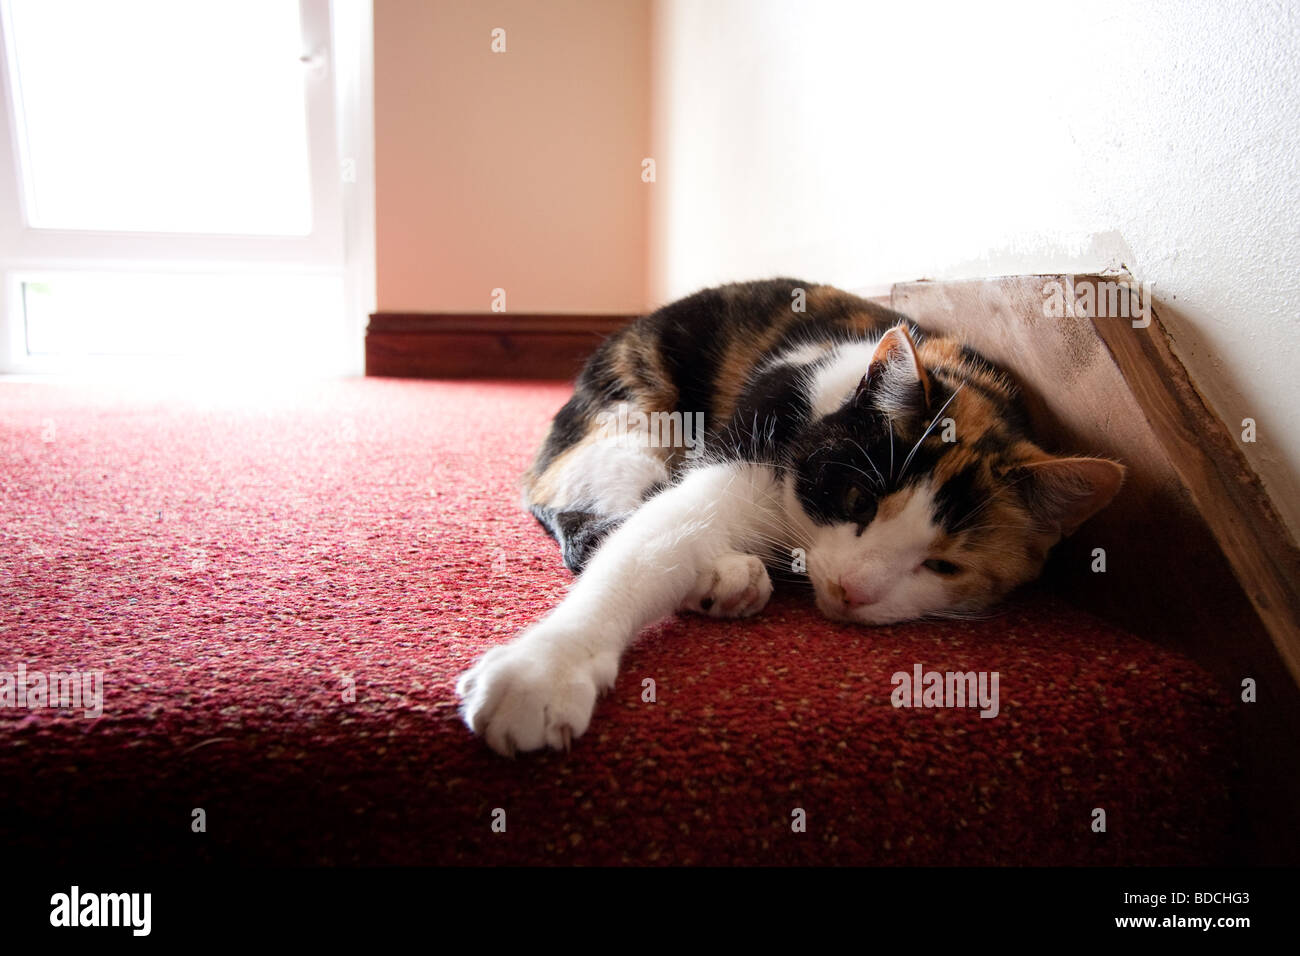 Little cat lying inside a house on red carpet. Stock Photo